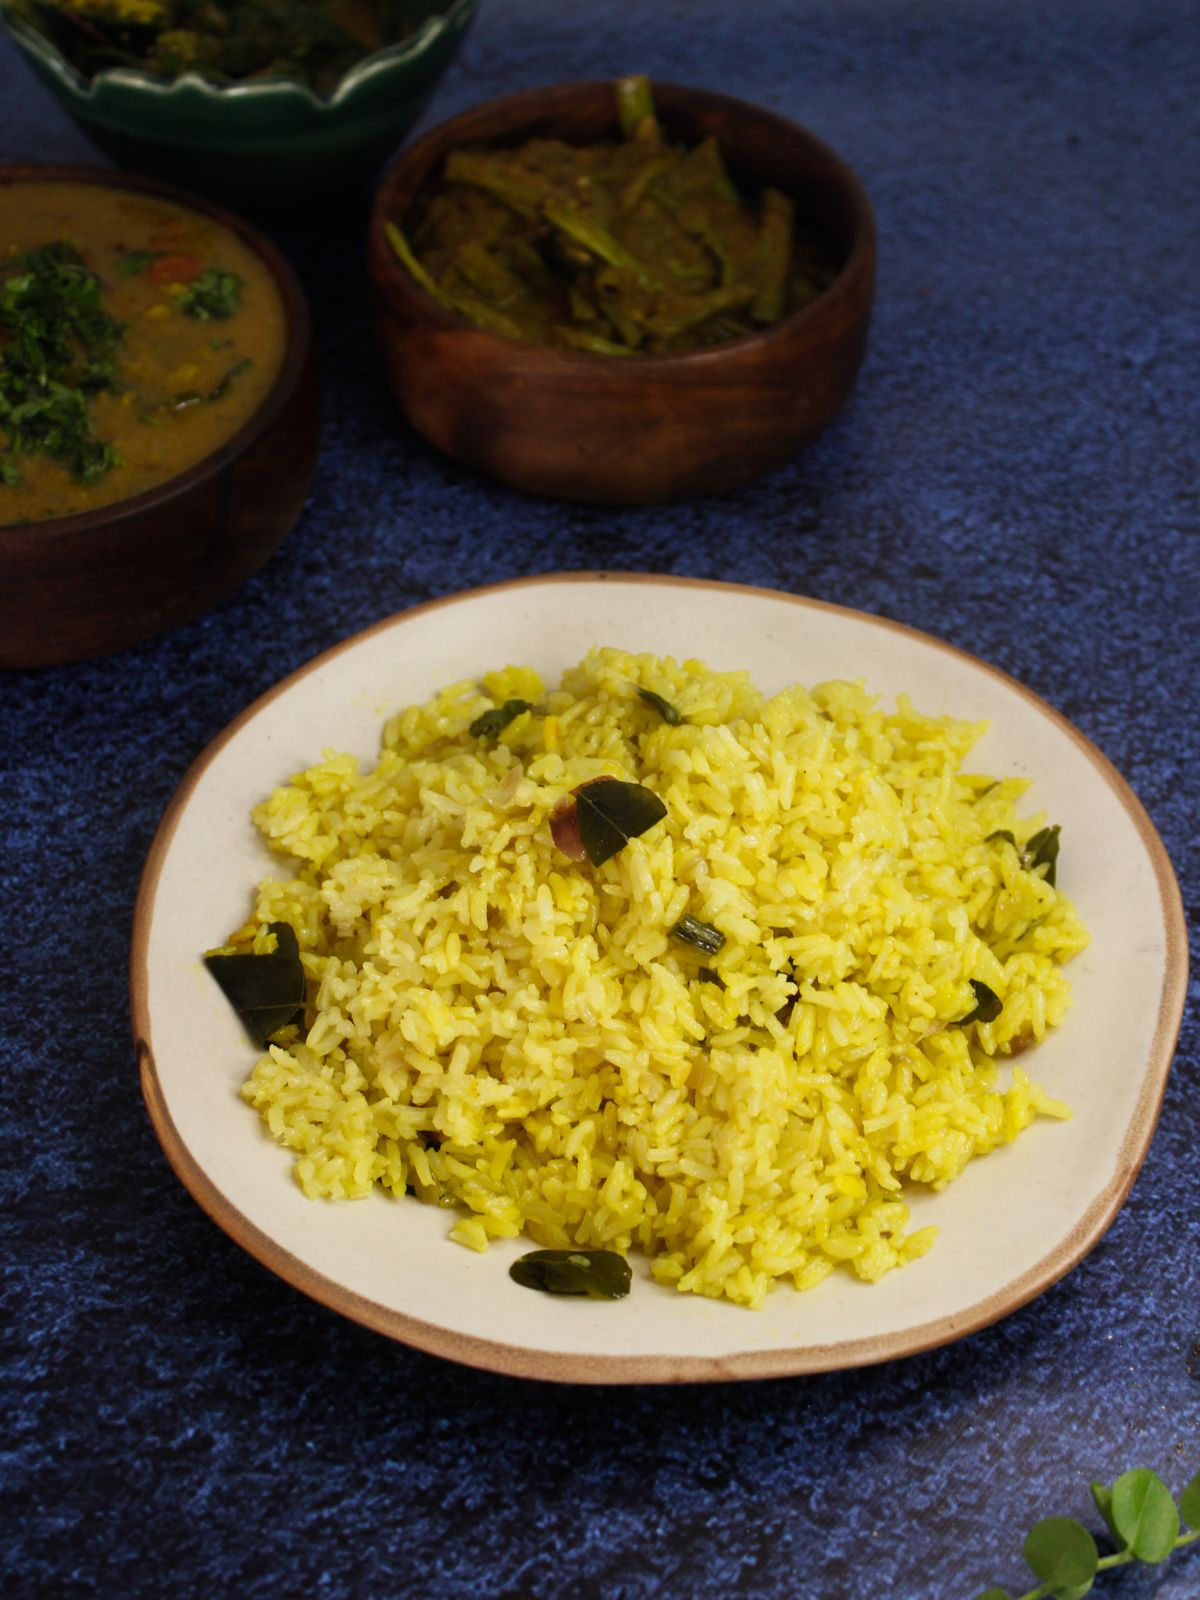 Serve hot Srilankan Yellow Rice with malay pickle or any curry